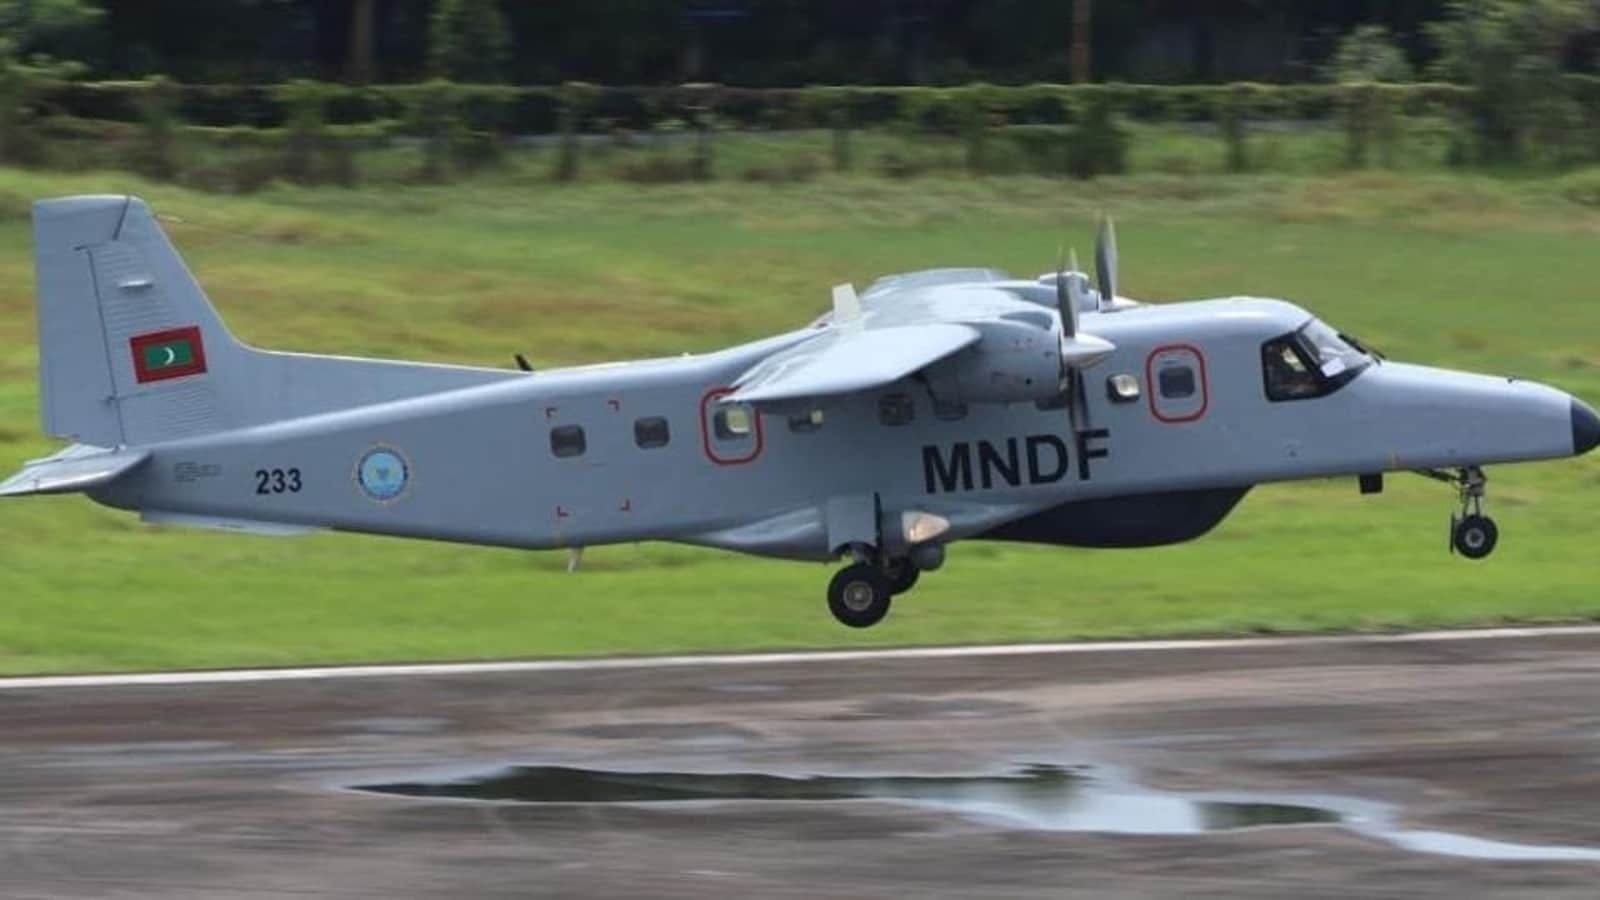 Maldives Replaces Indian Military with Civilians for Gifted Aircraft, Lacks Qualified Pilots